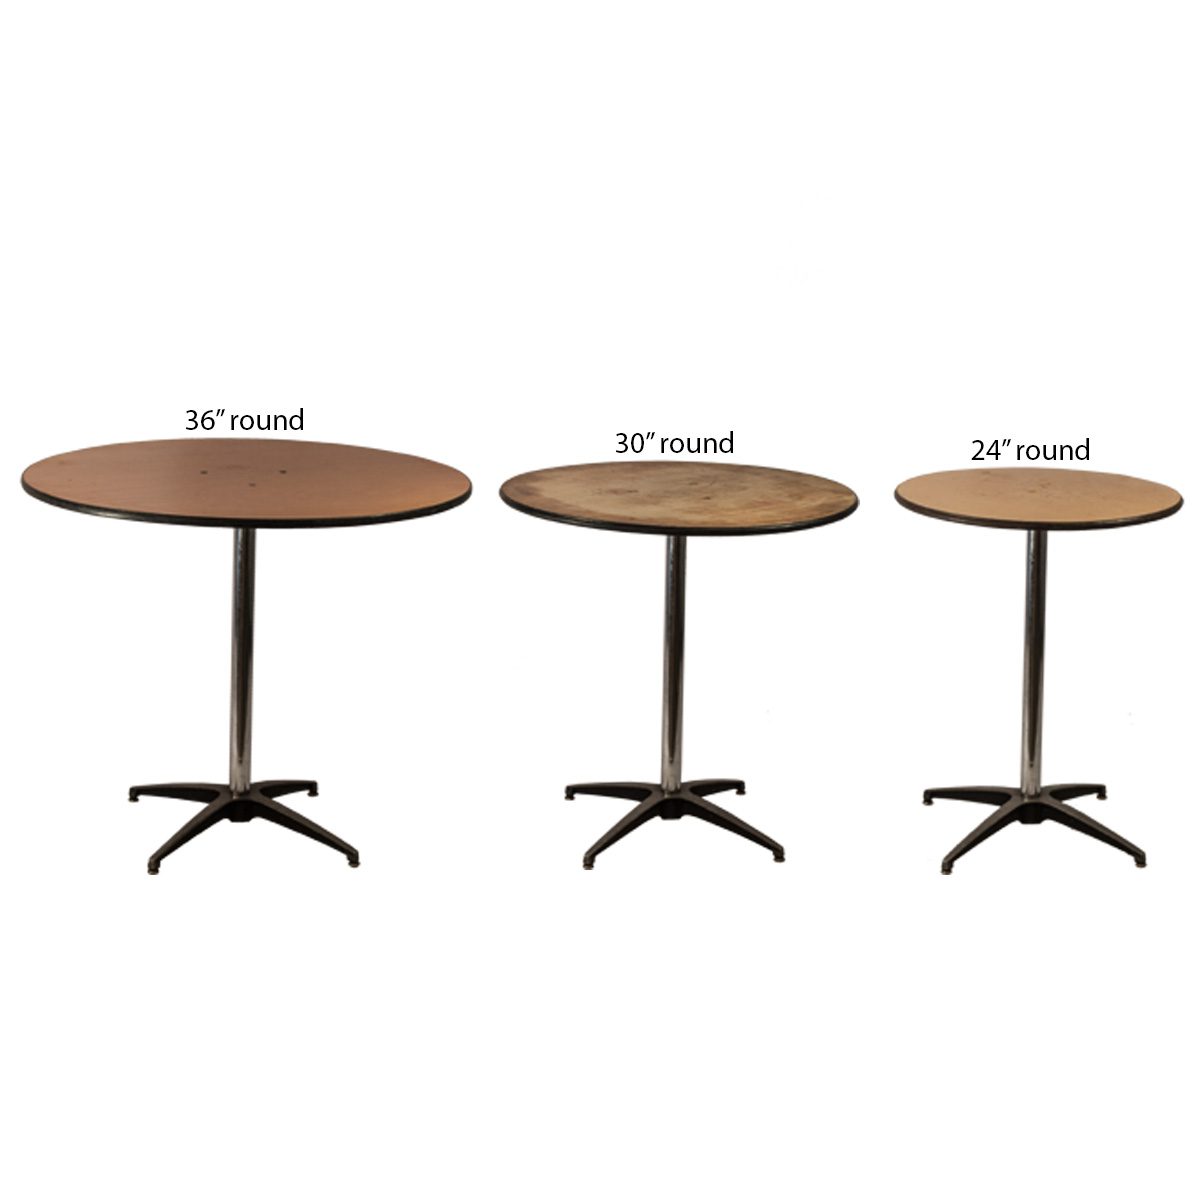 Round Table 36 30 24, What Size Tablecloth For A 36 Inch Round Table